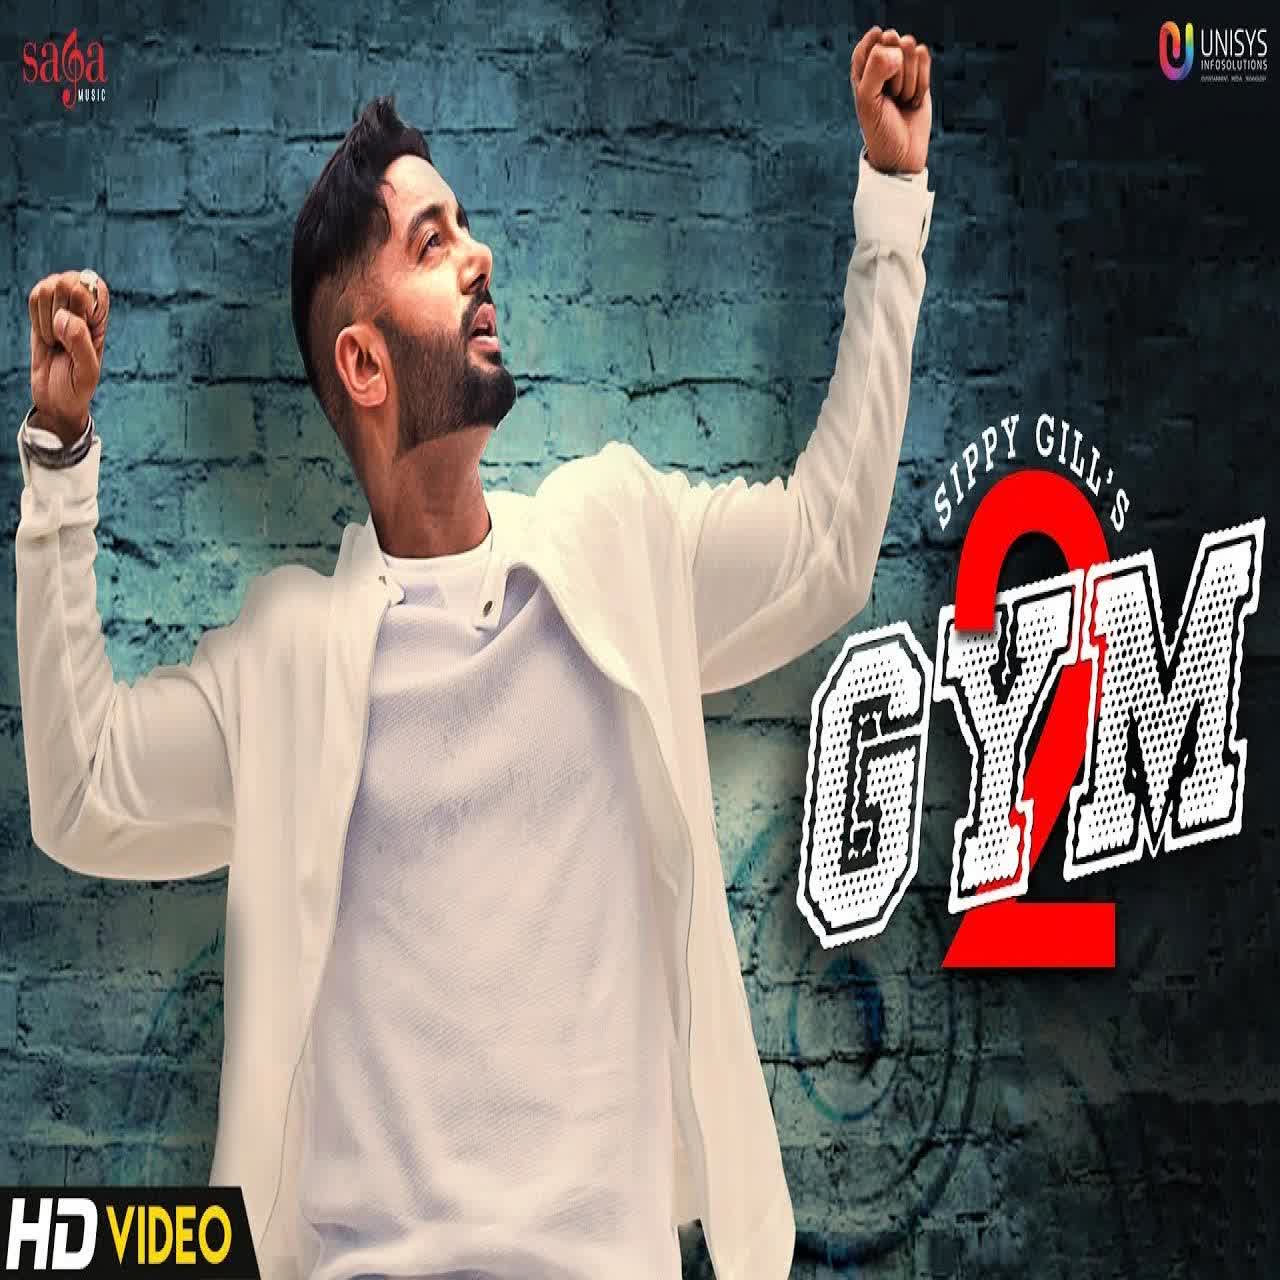 Gym 2 Sippy Gill mp3 song